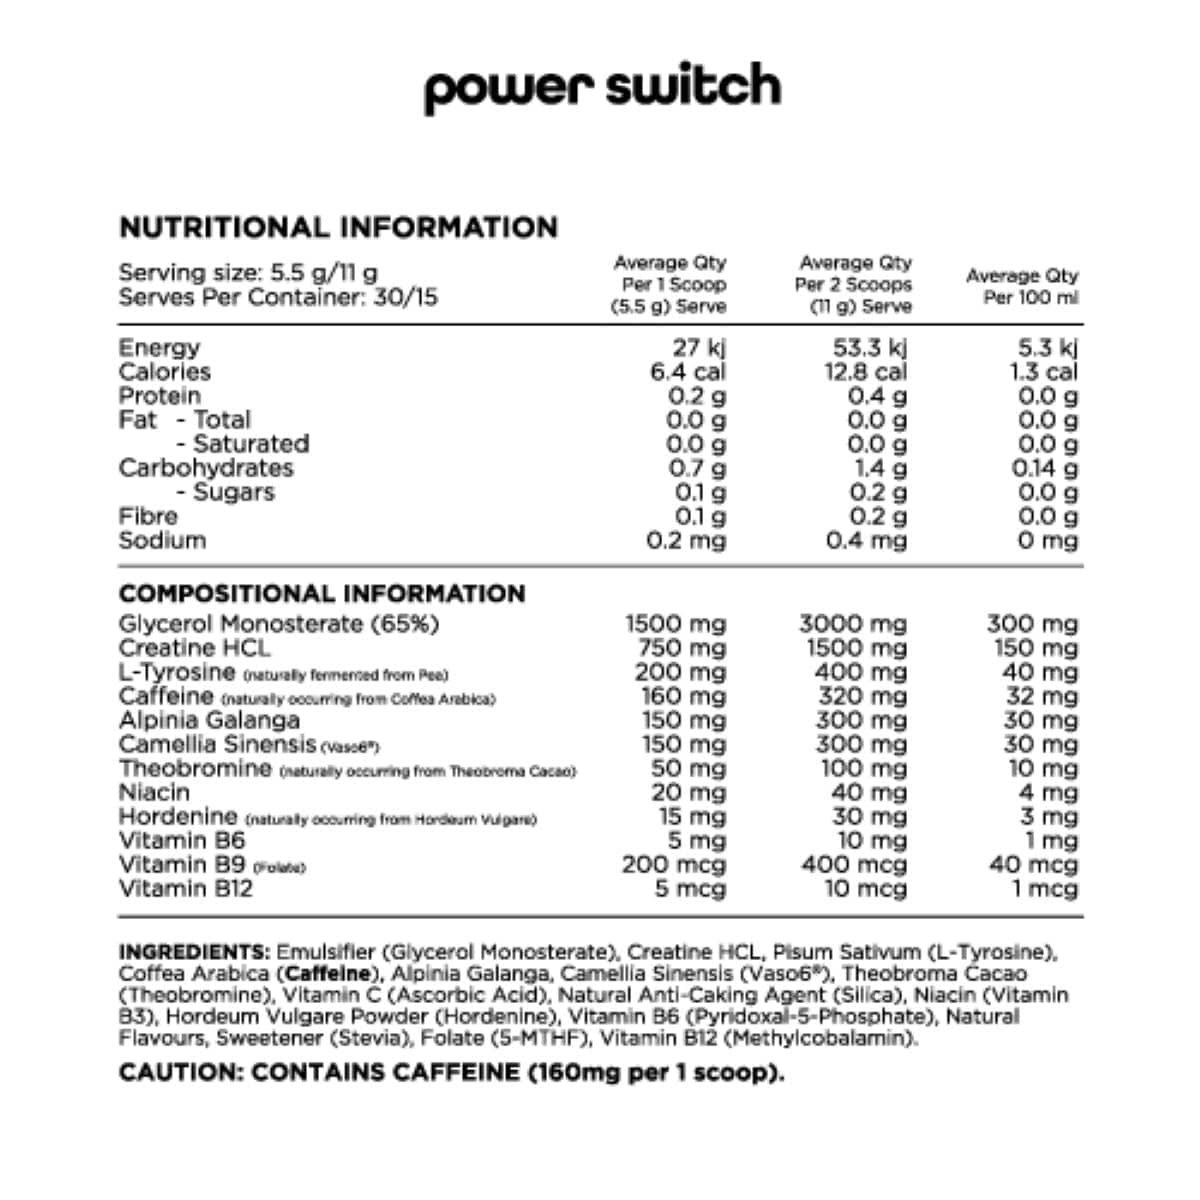 Switch Nutrition Power Performance Energy Pre-Workout Red Raspberry 165g